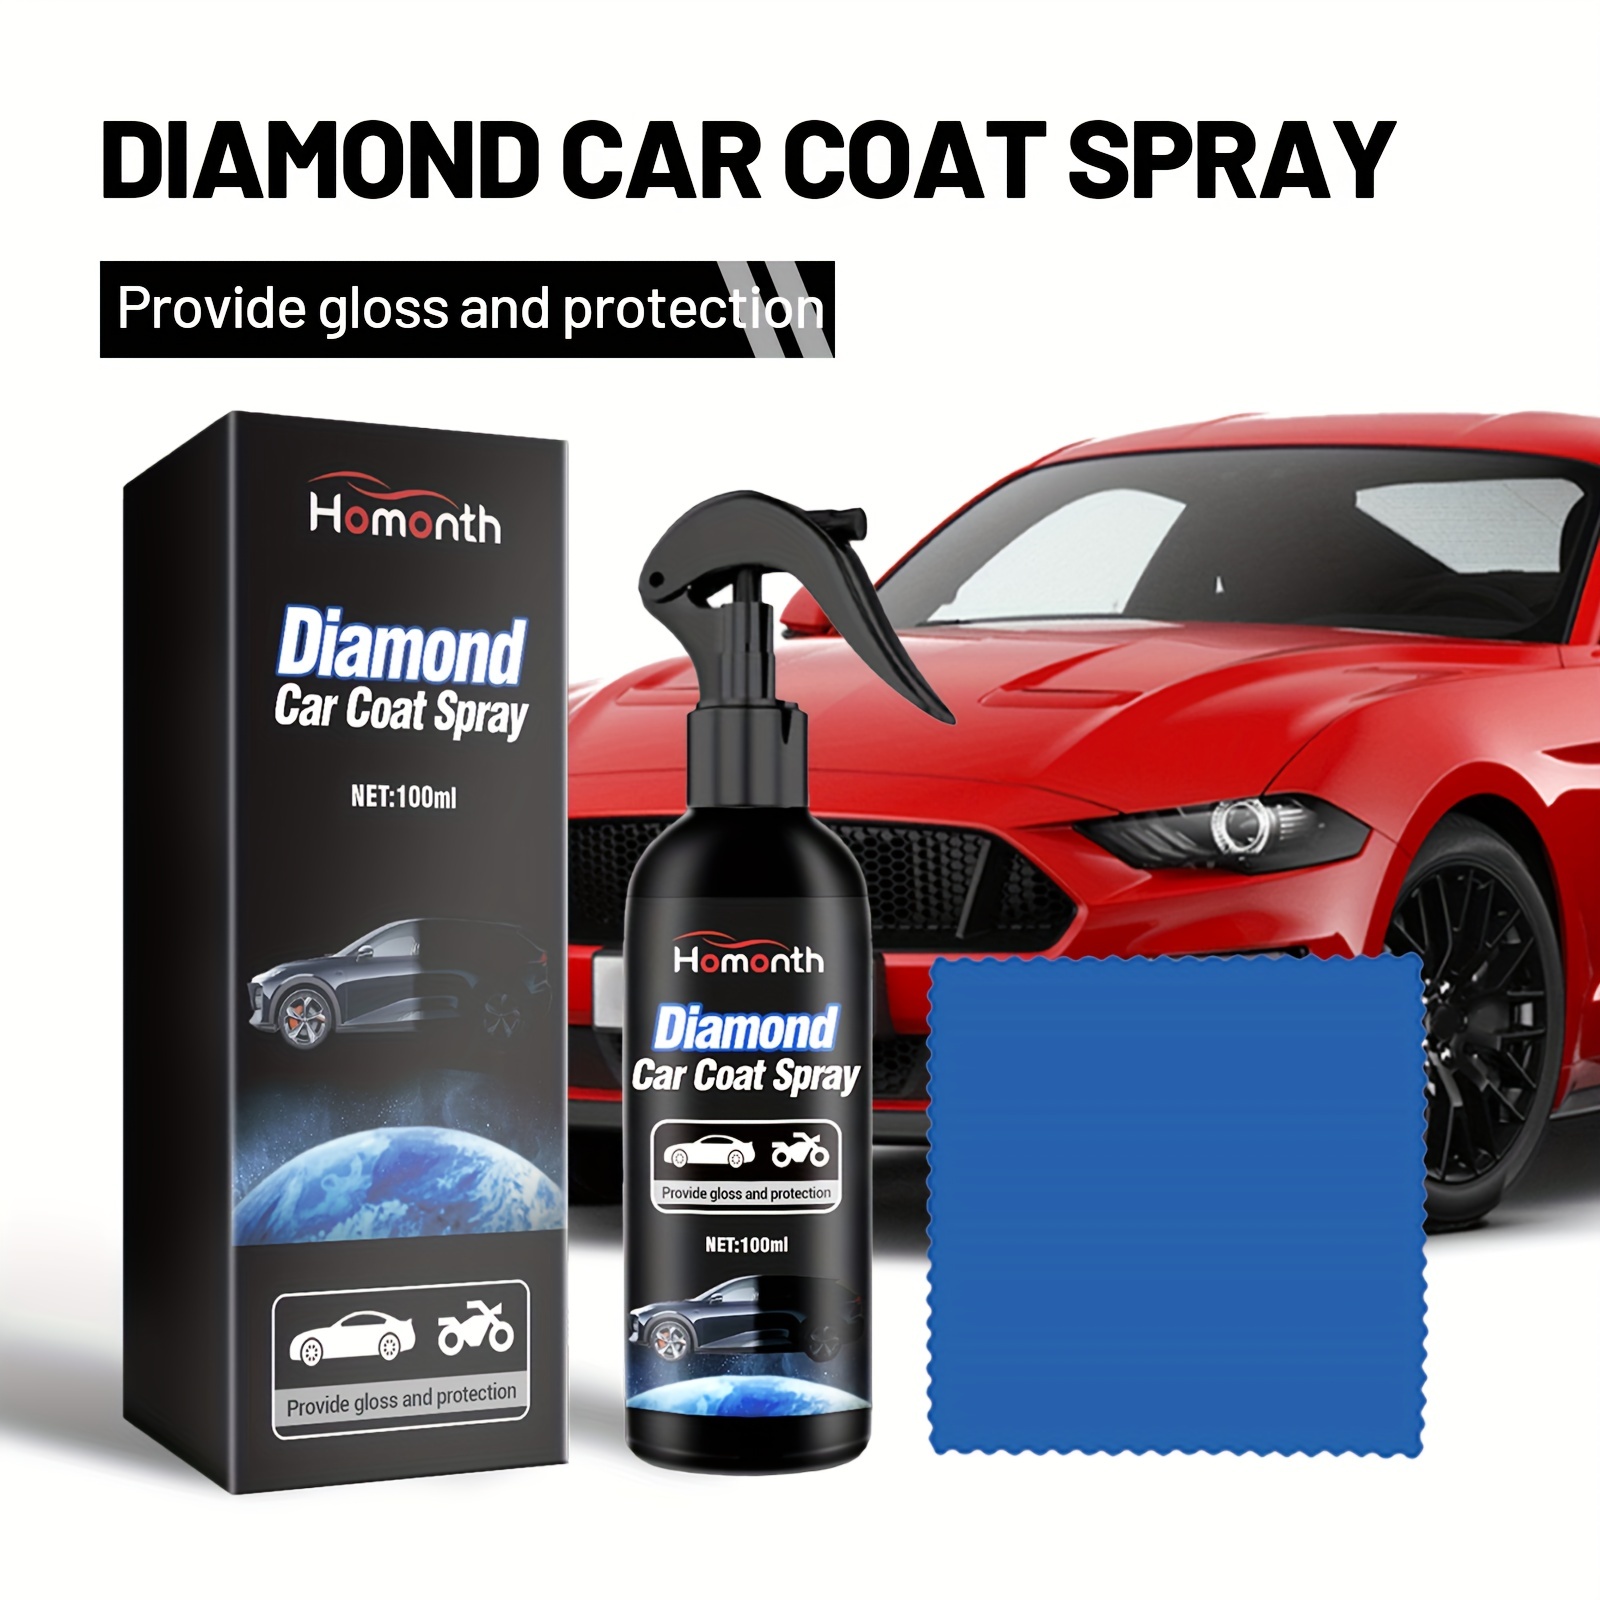 3 in 1 High Protection Ceramic Car Wash Fortify Quick Coat Polish